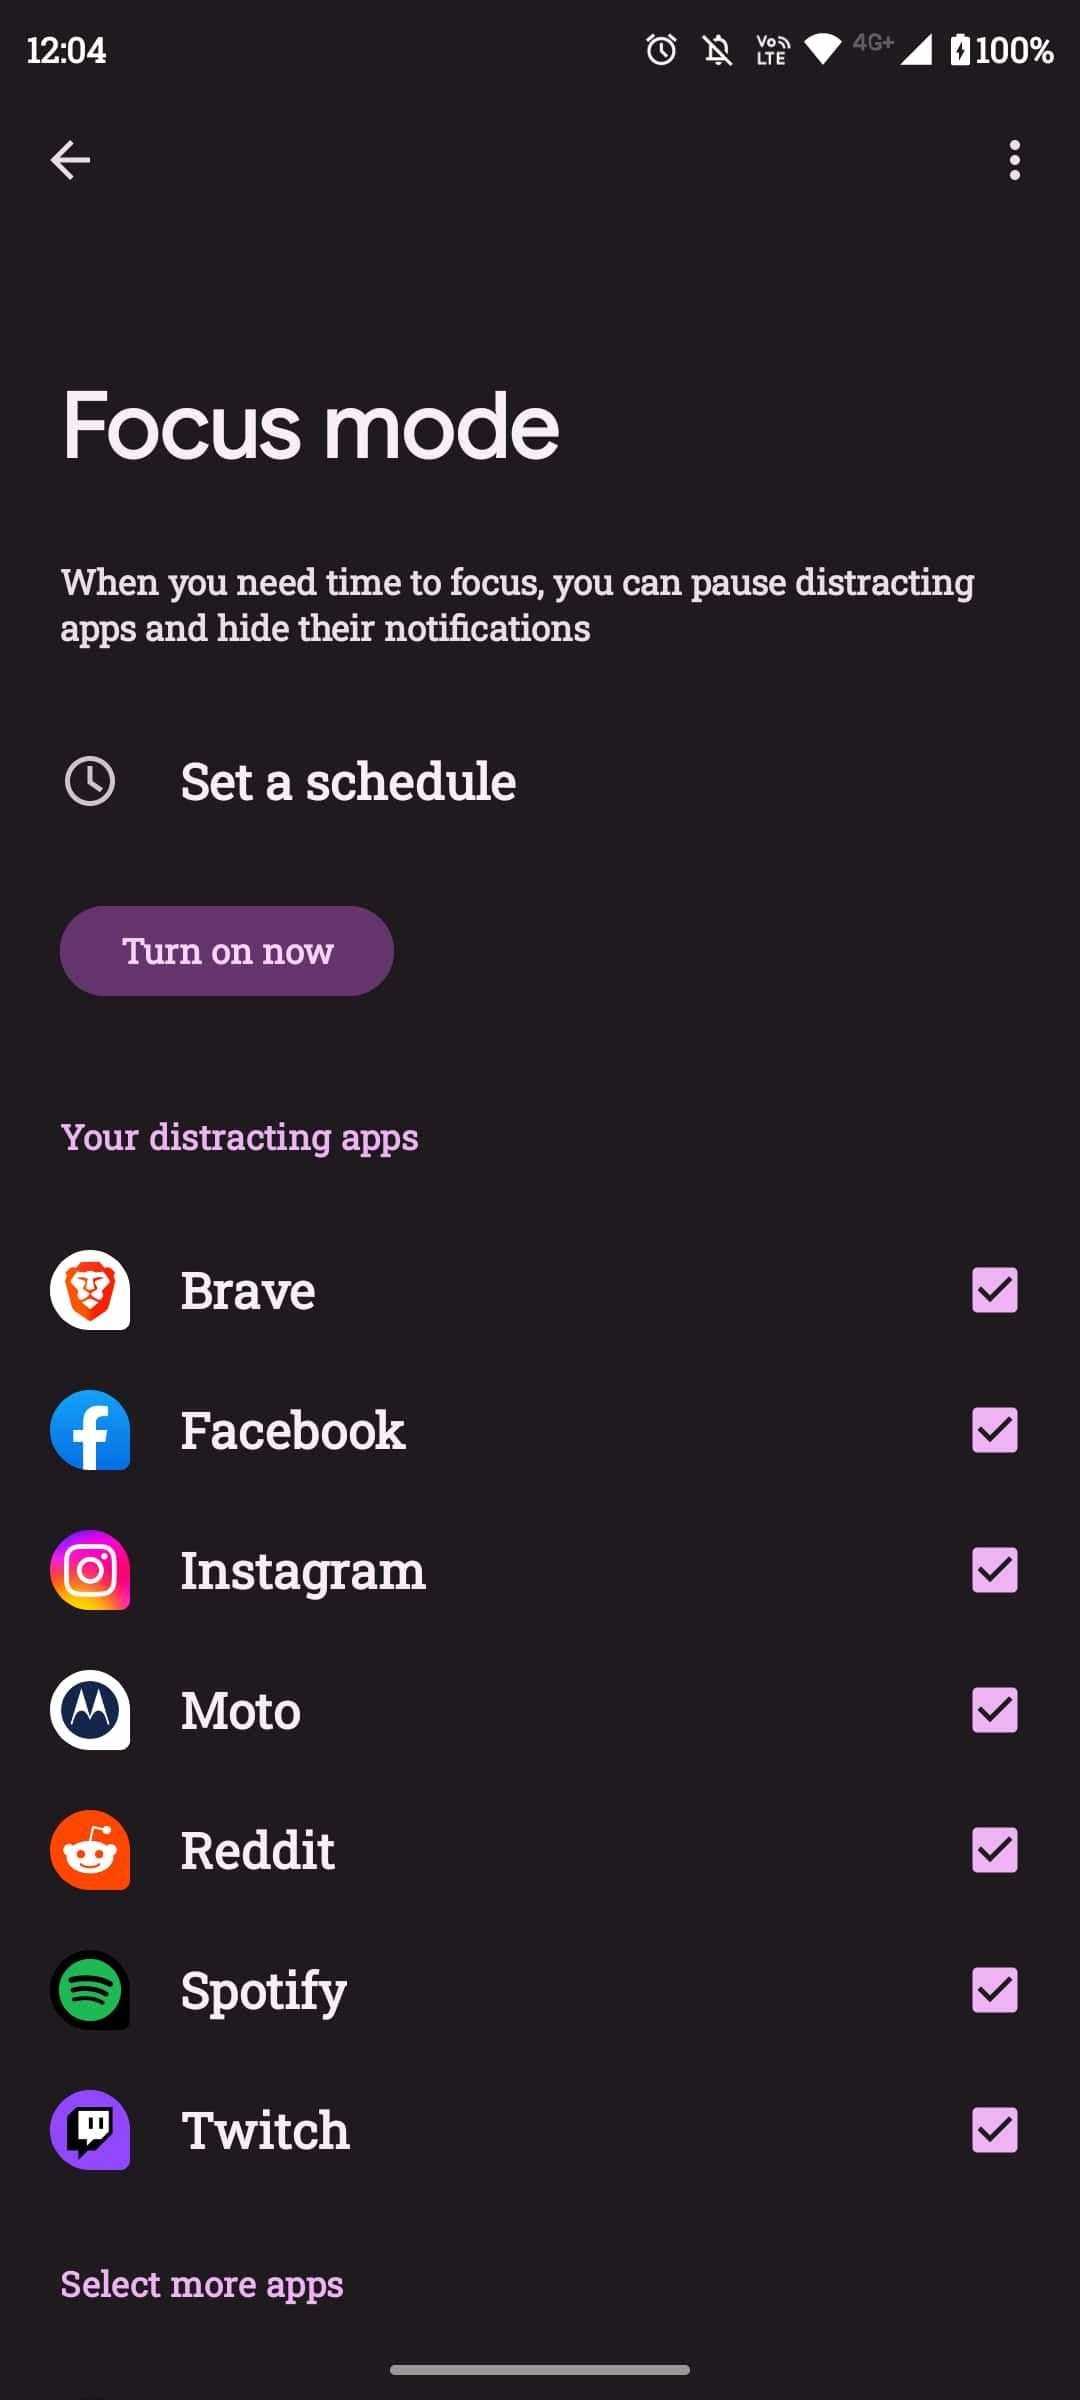 List of selectable apps in Focus mode